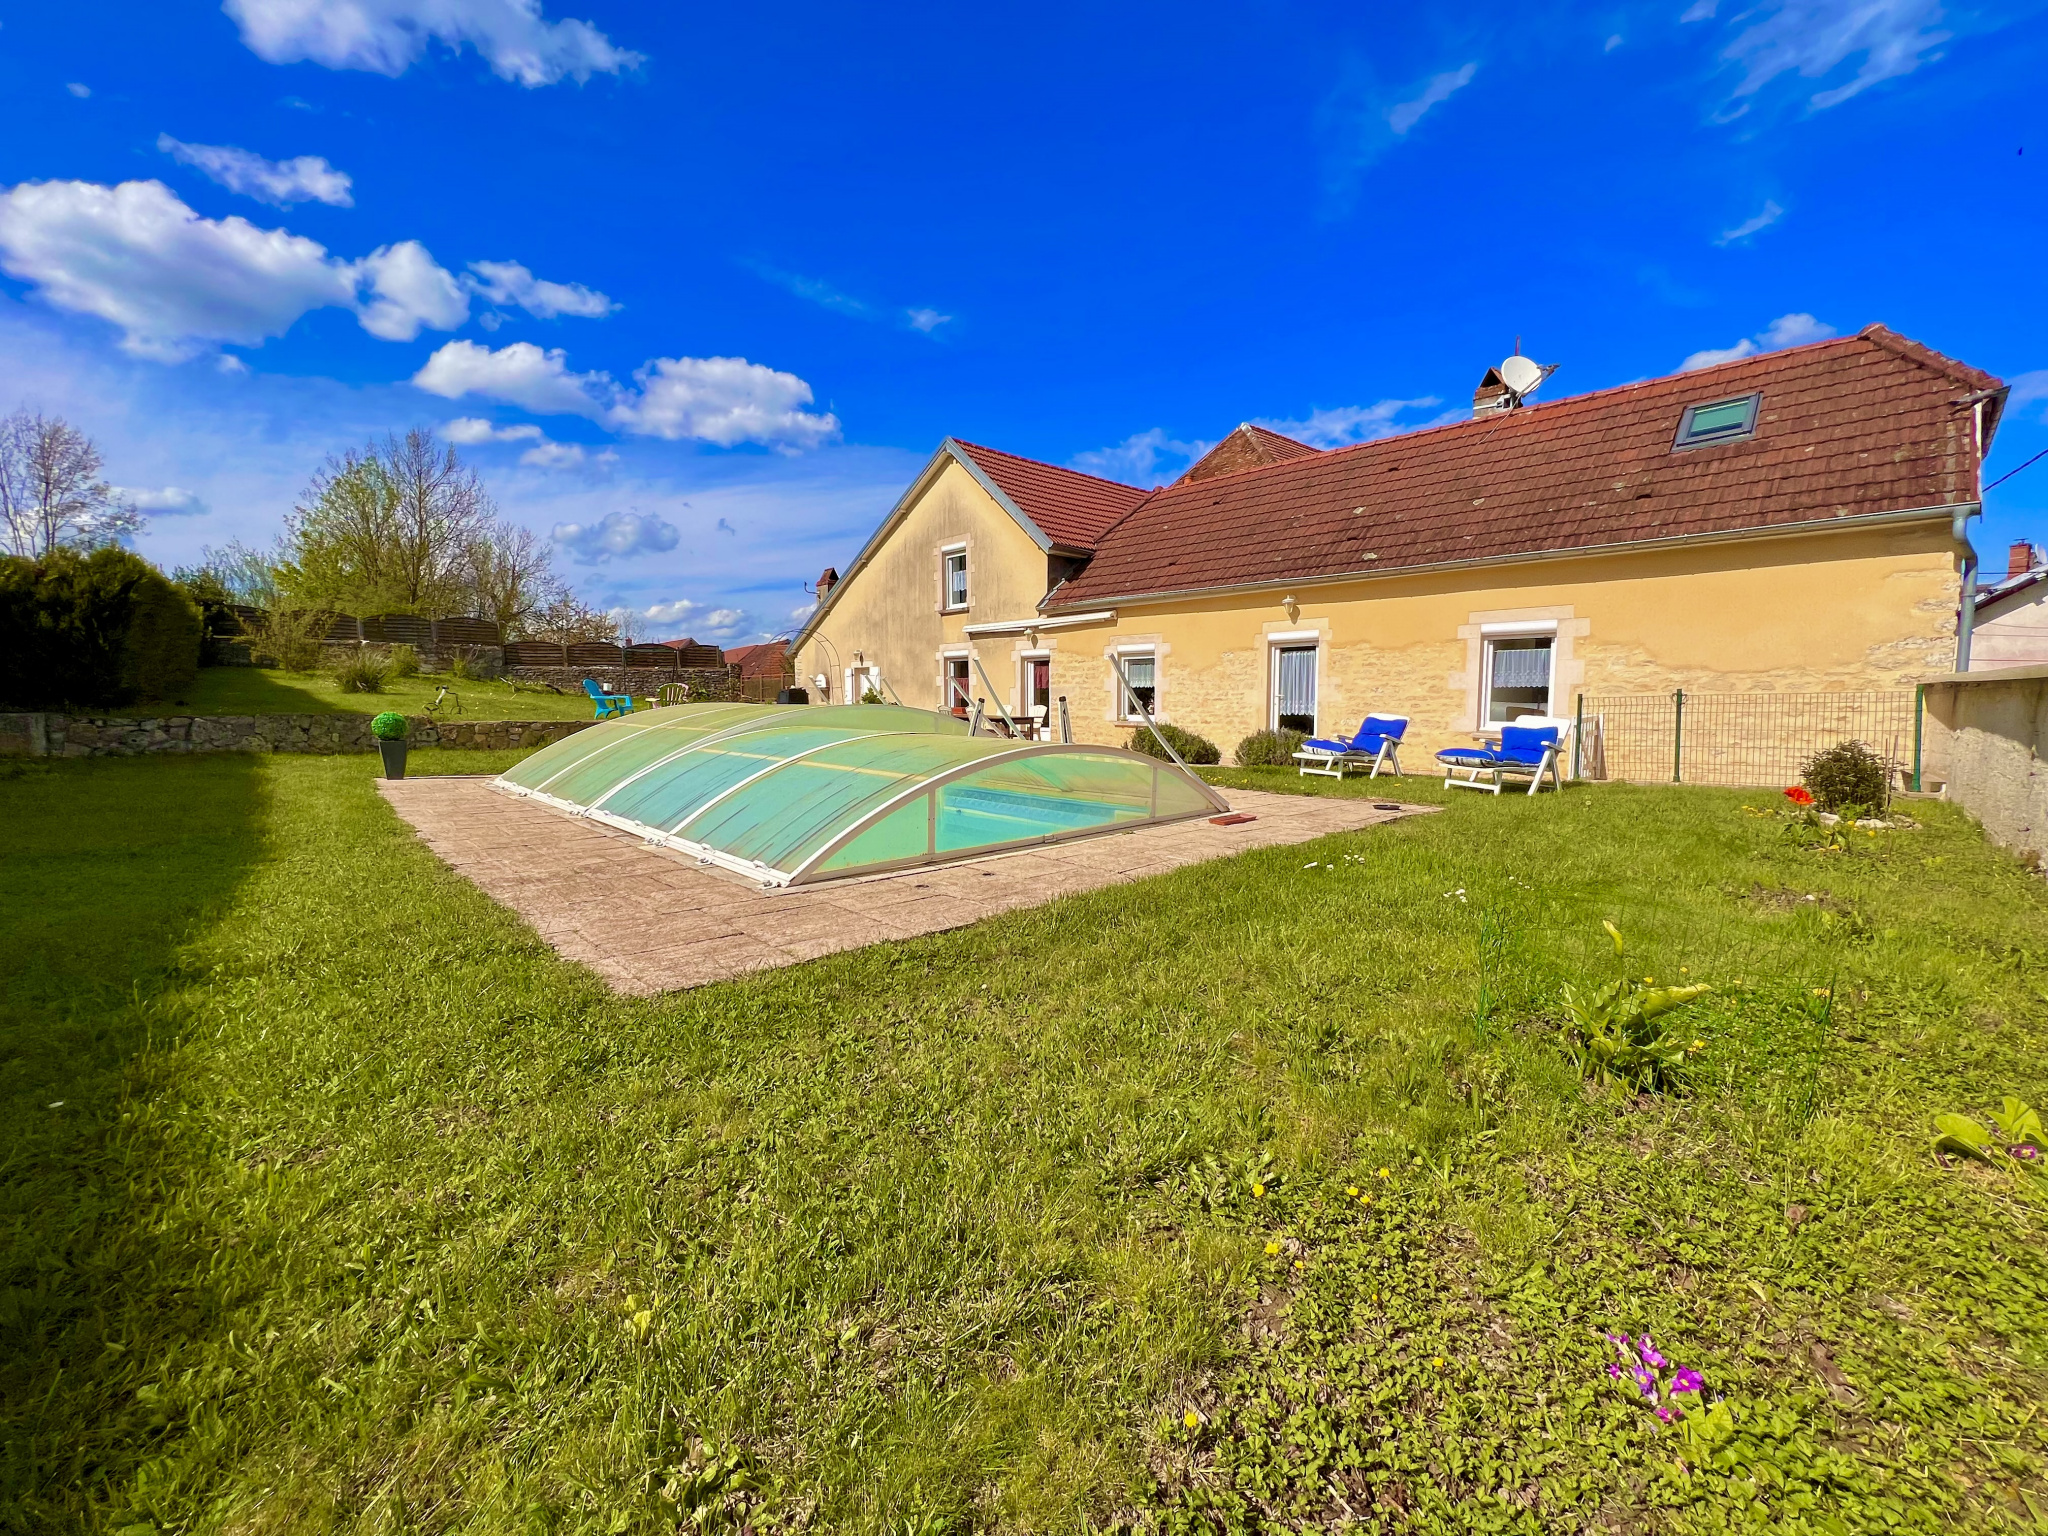 Maison 7 pièces - 156m² - MARNAY